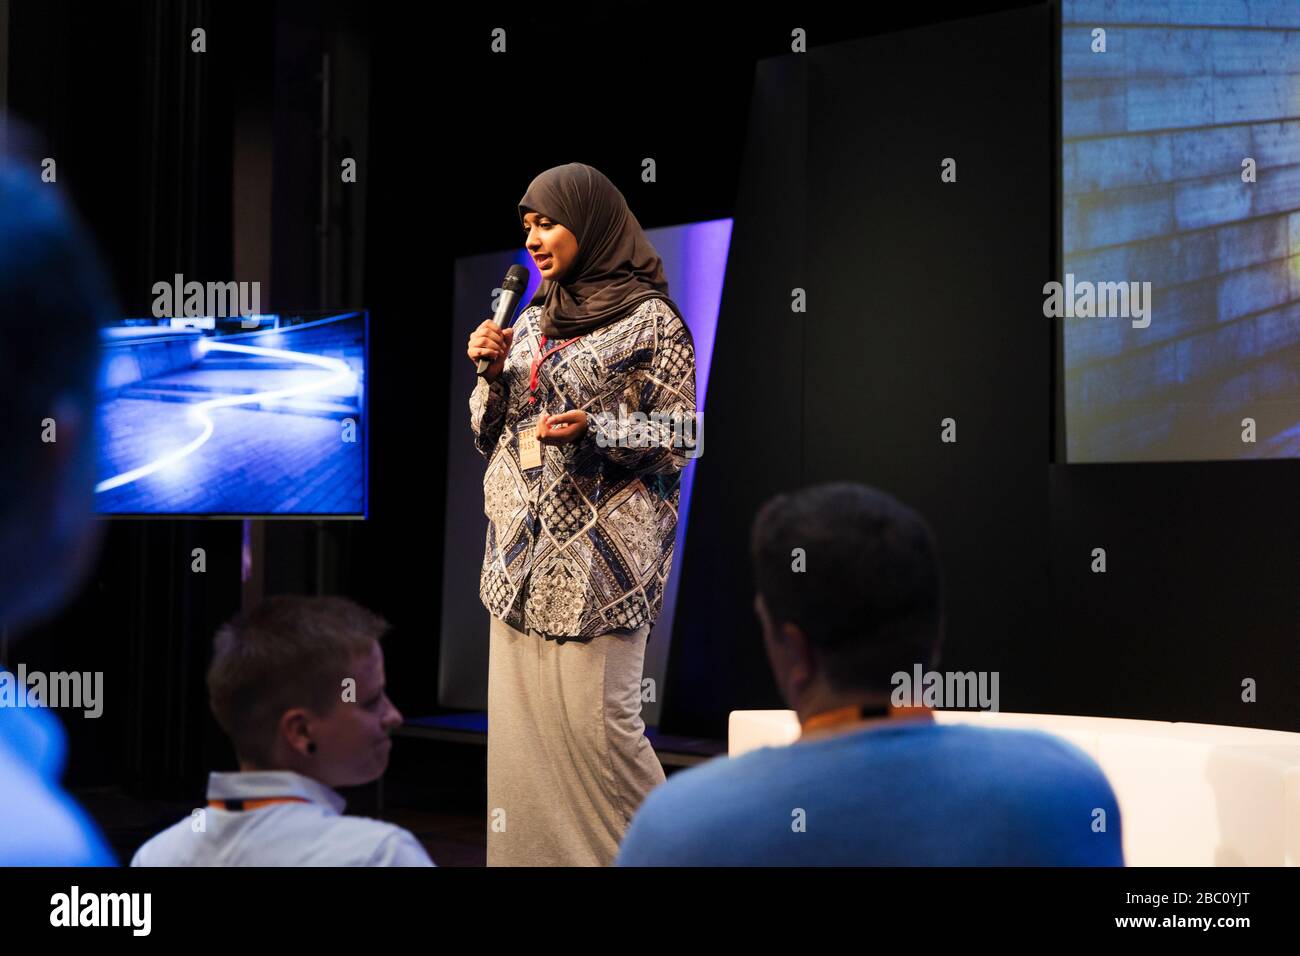 Female speaker in hijab on stage talking to audience Stock Photo